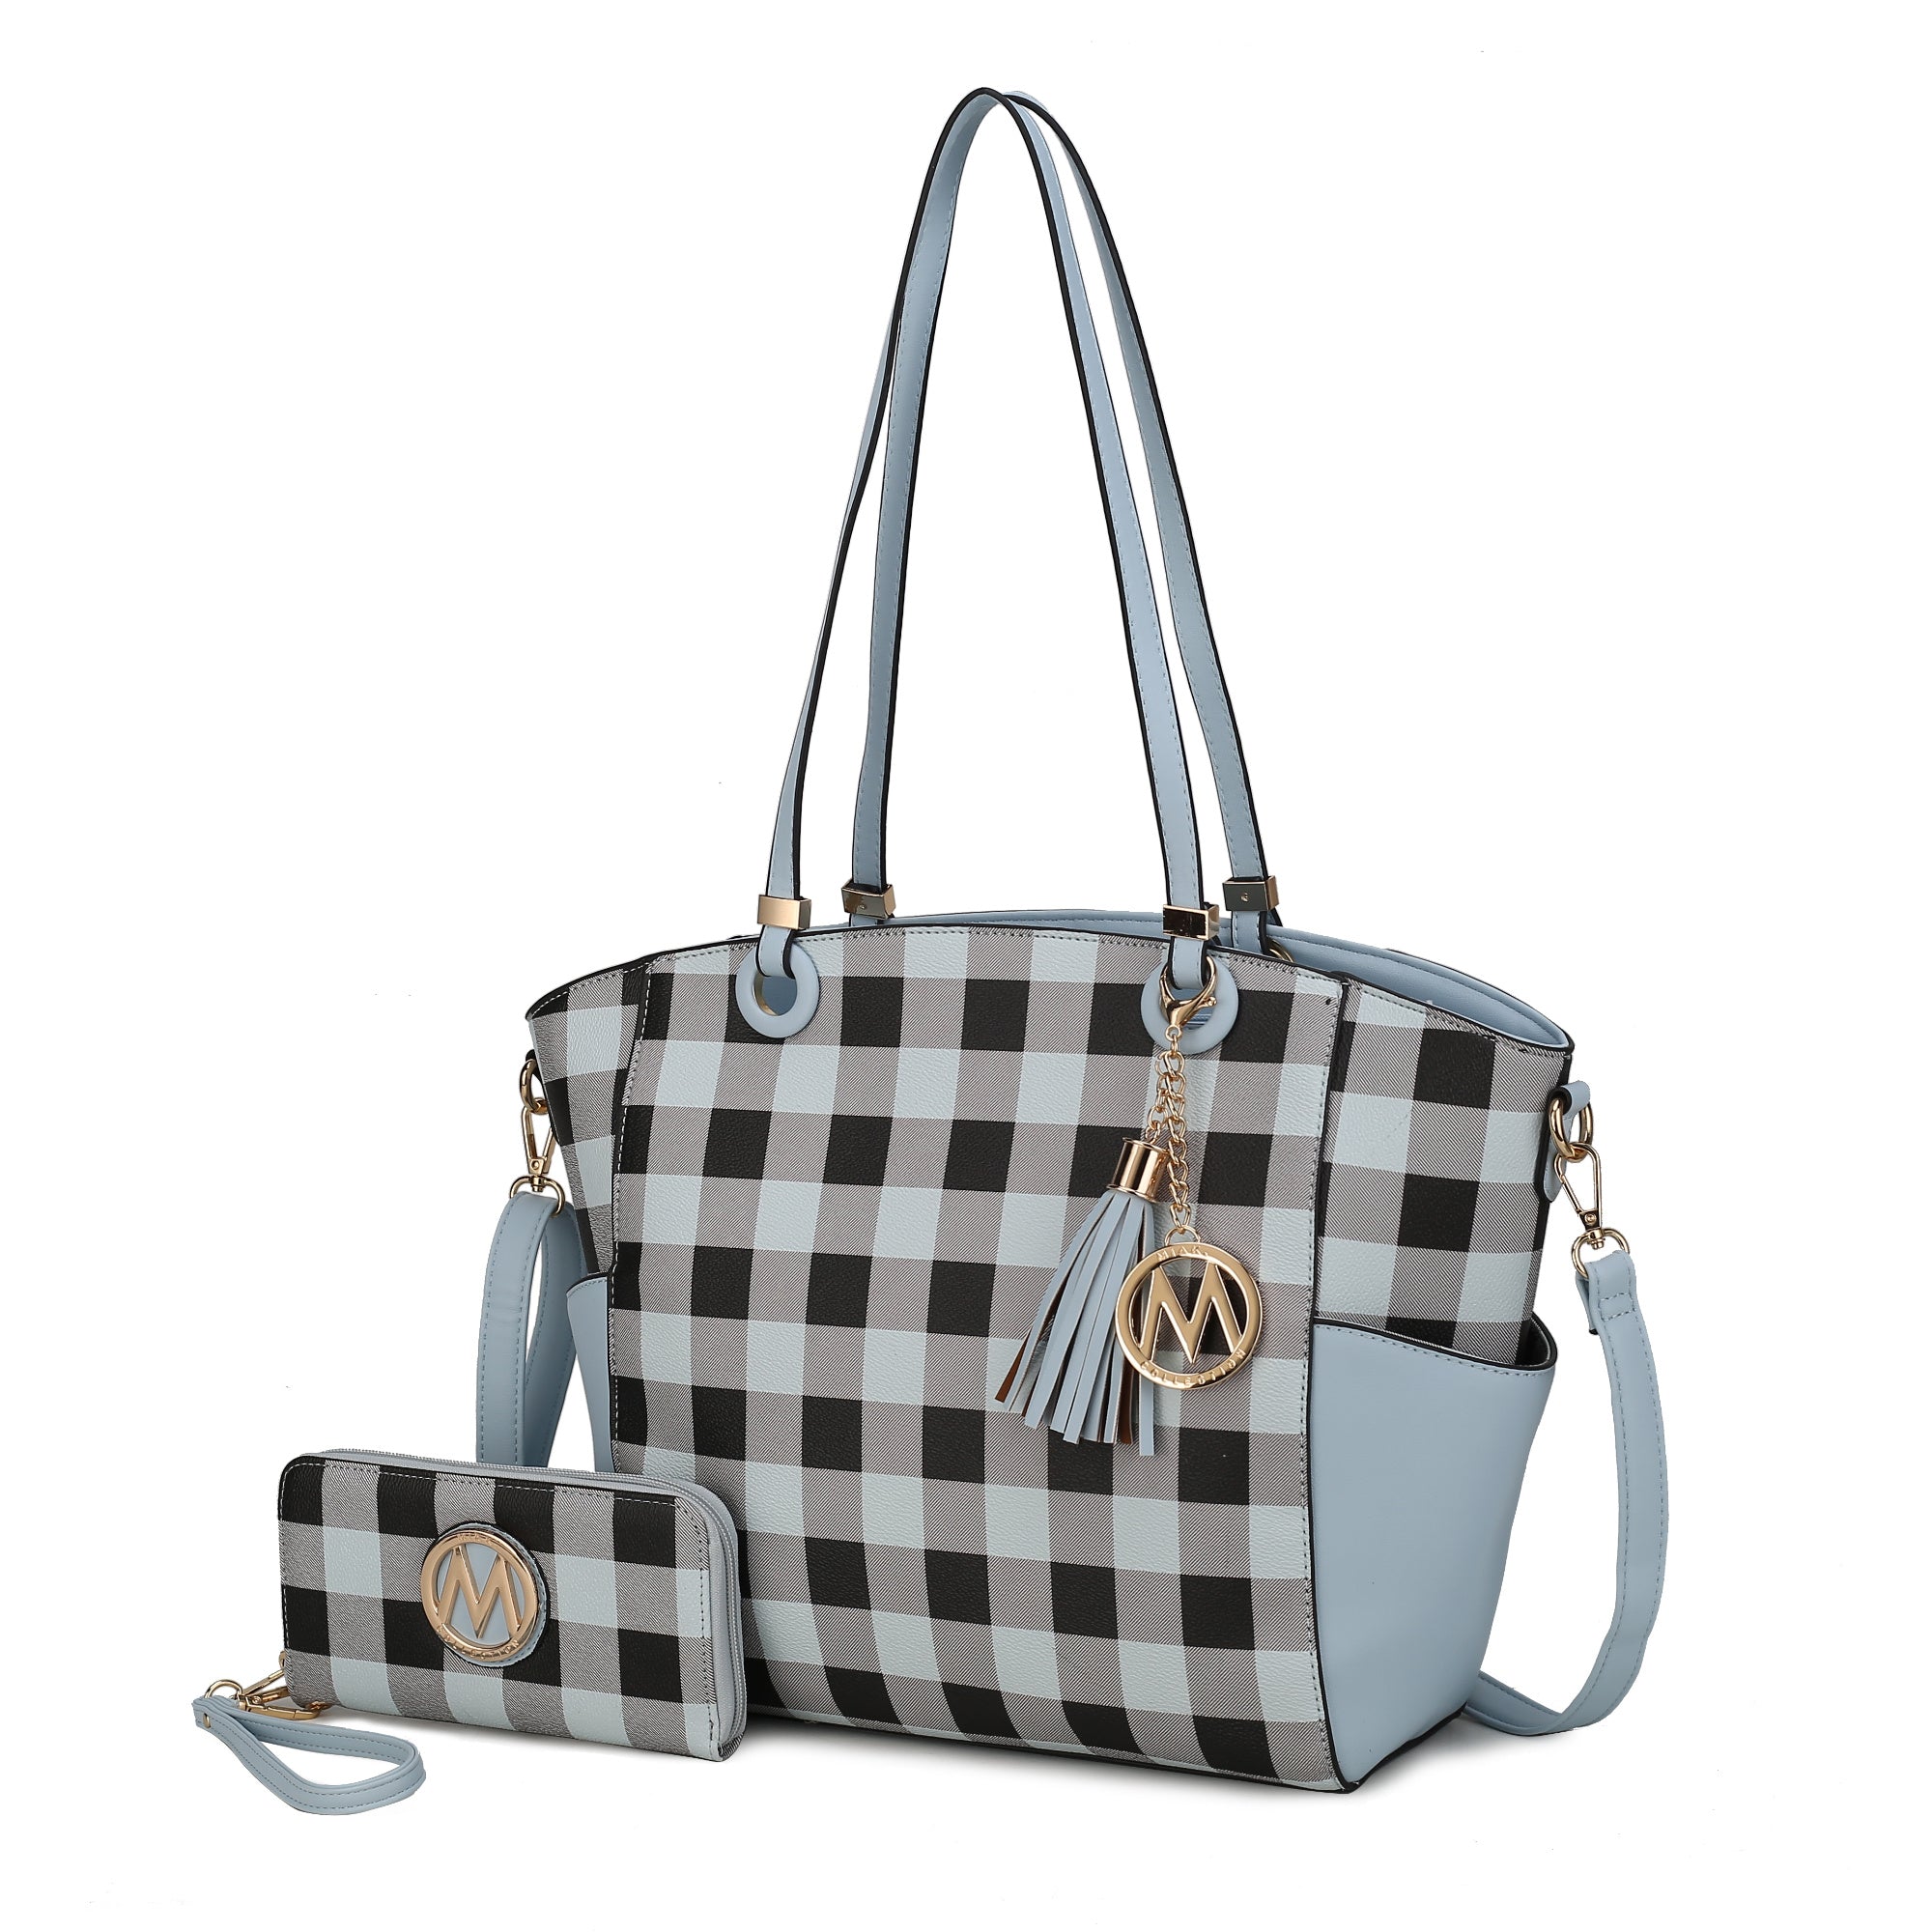 MKF Collection Karlie Tote Handbag with Wallet by Mia K